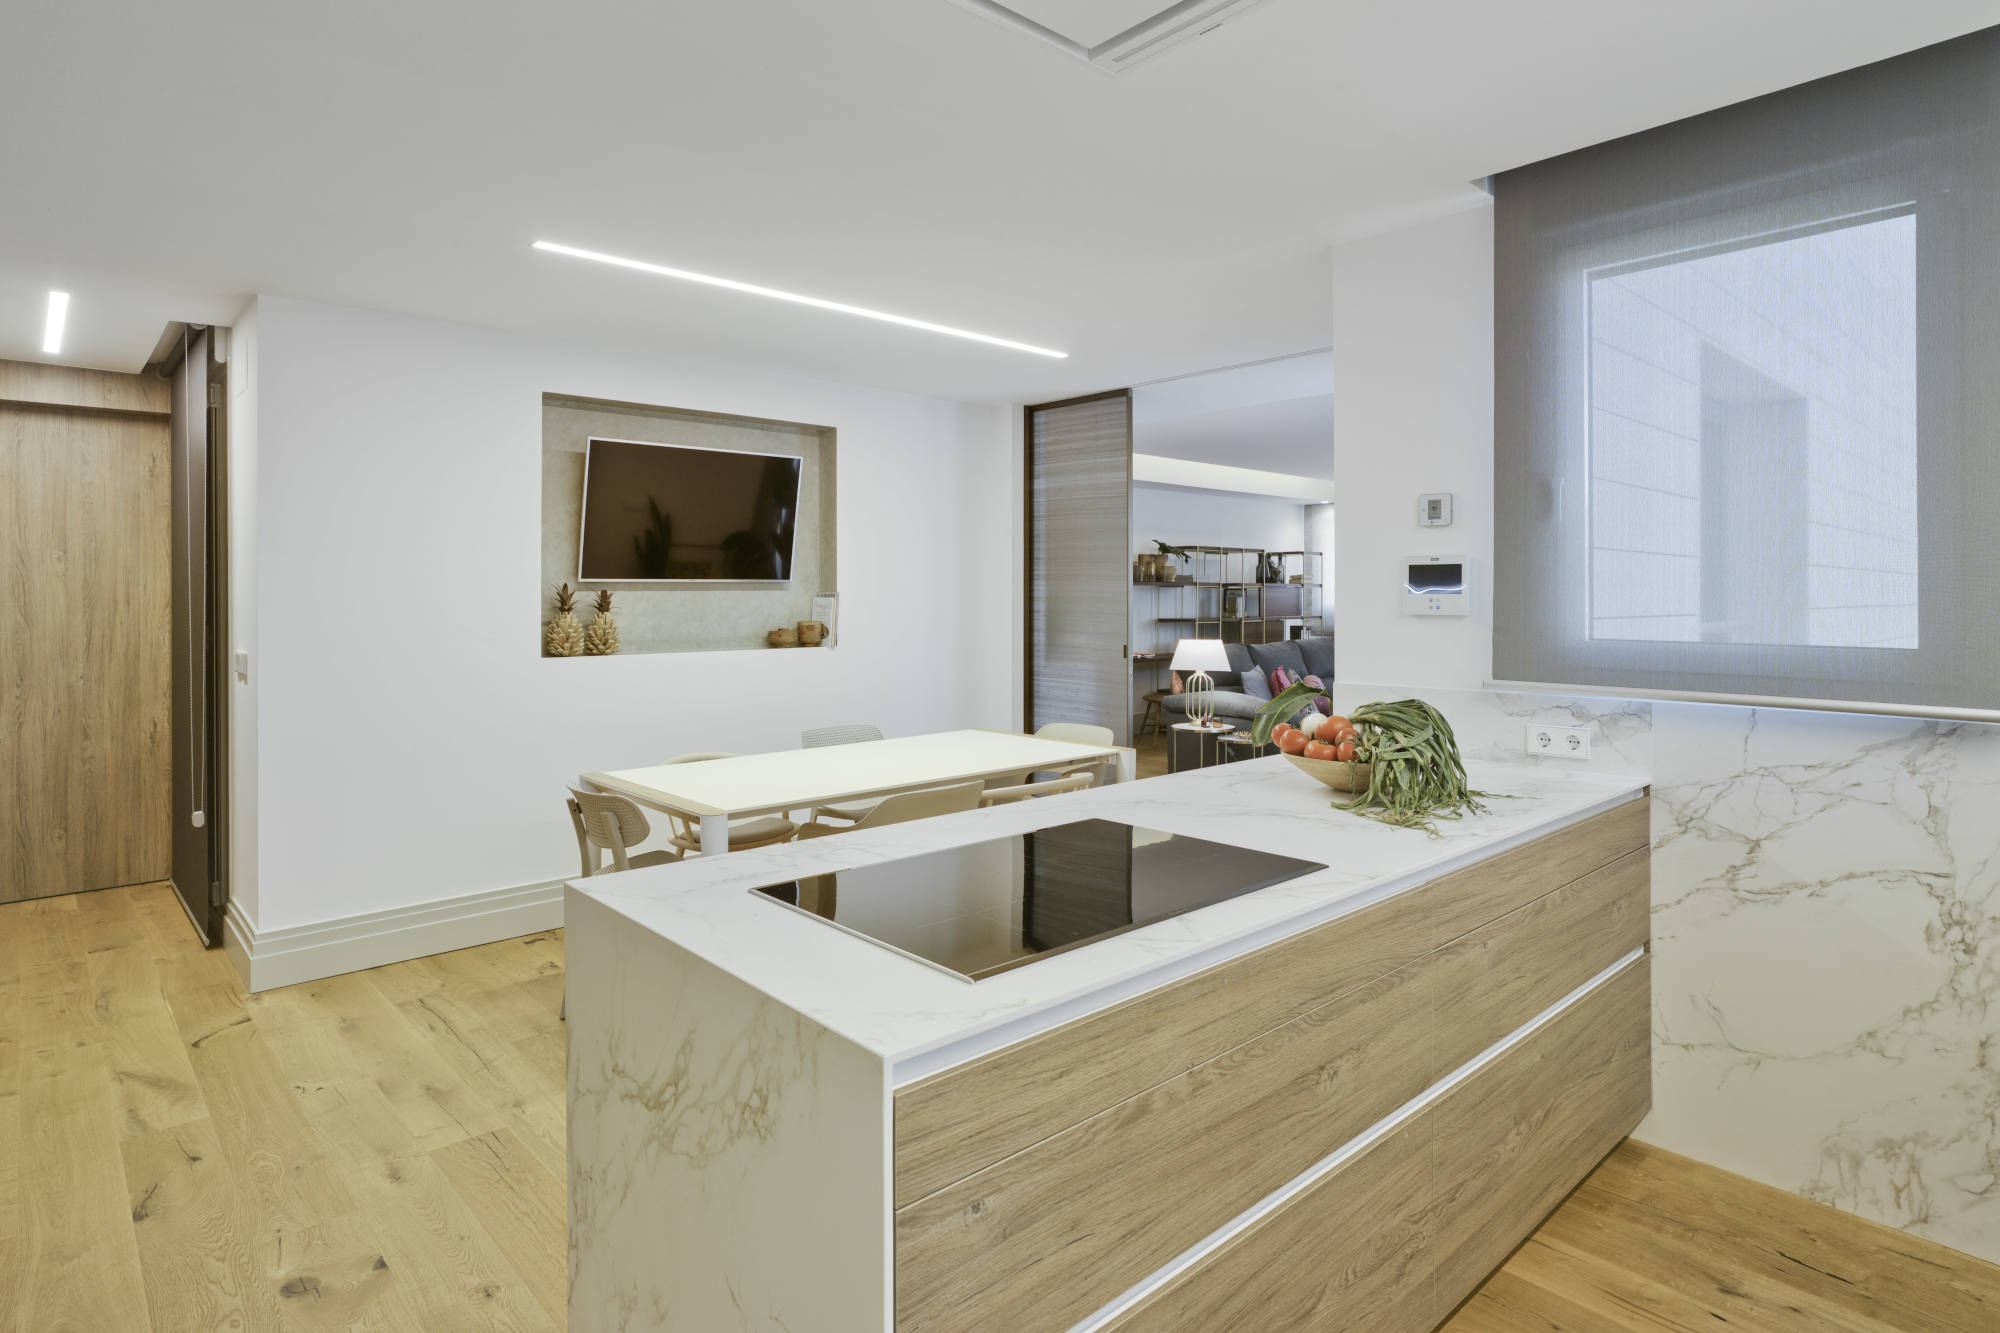 Image of MC2 1 in A carbon-neutral worktop for a sustainable house that connects indoors and outdoors - Cosentino